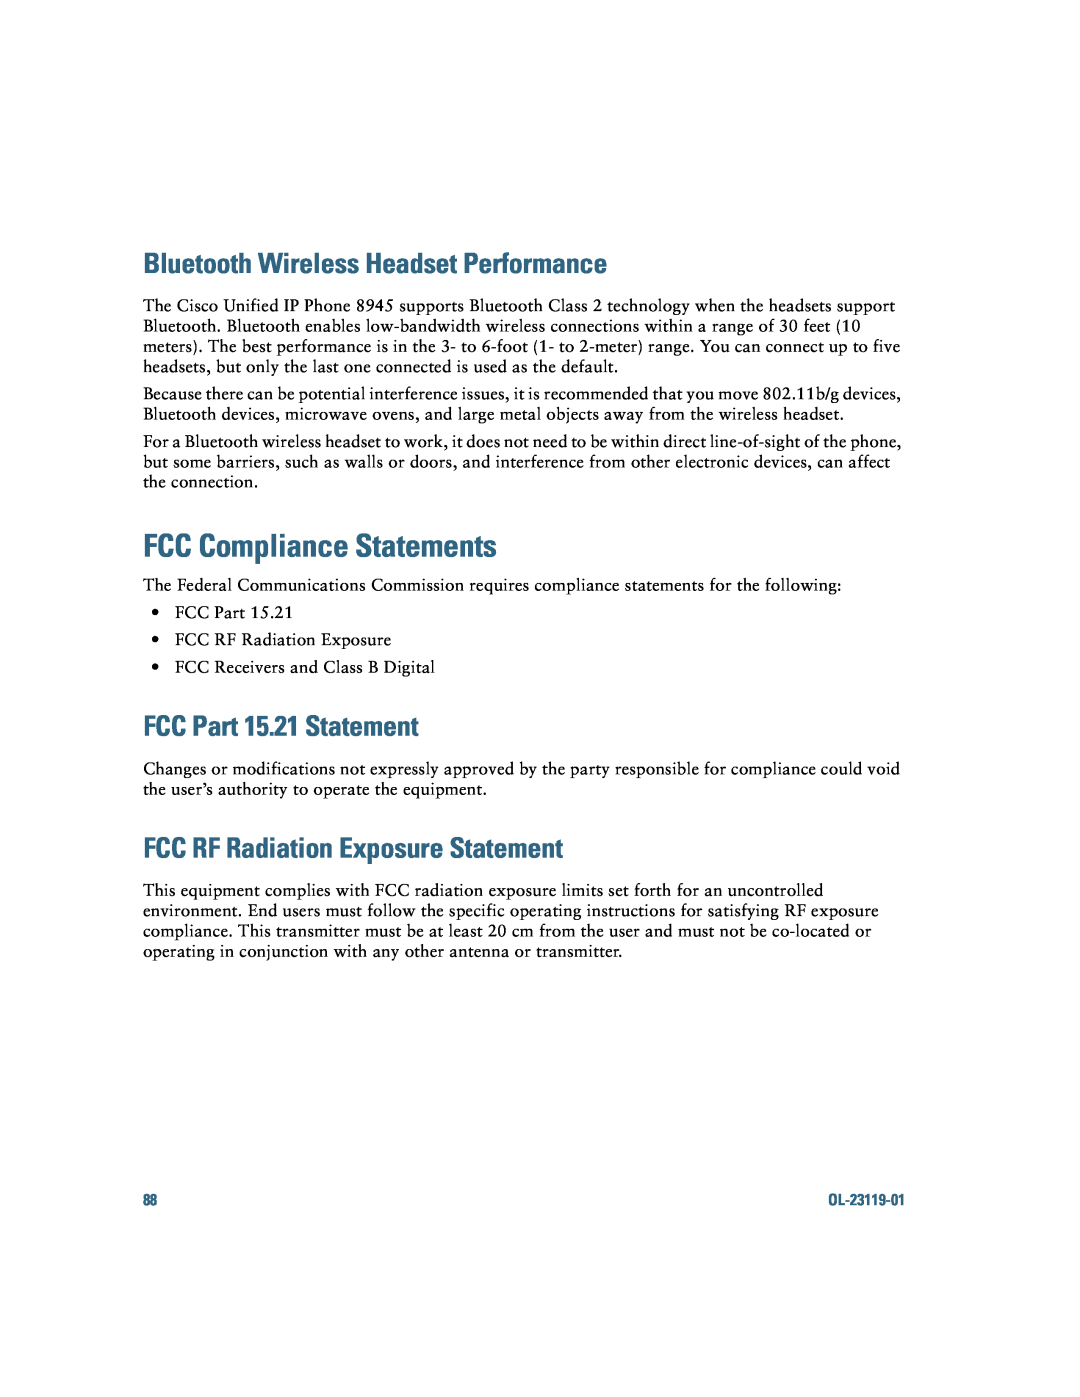 Cisco Systems IP Phone 8941 and 8945 manual FCC Compliance Statements, Bluetooth Wireless Headset Performance 